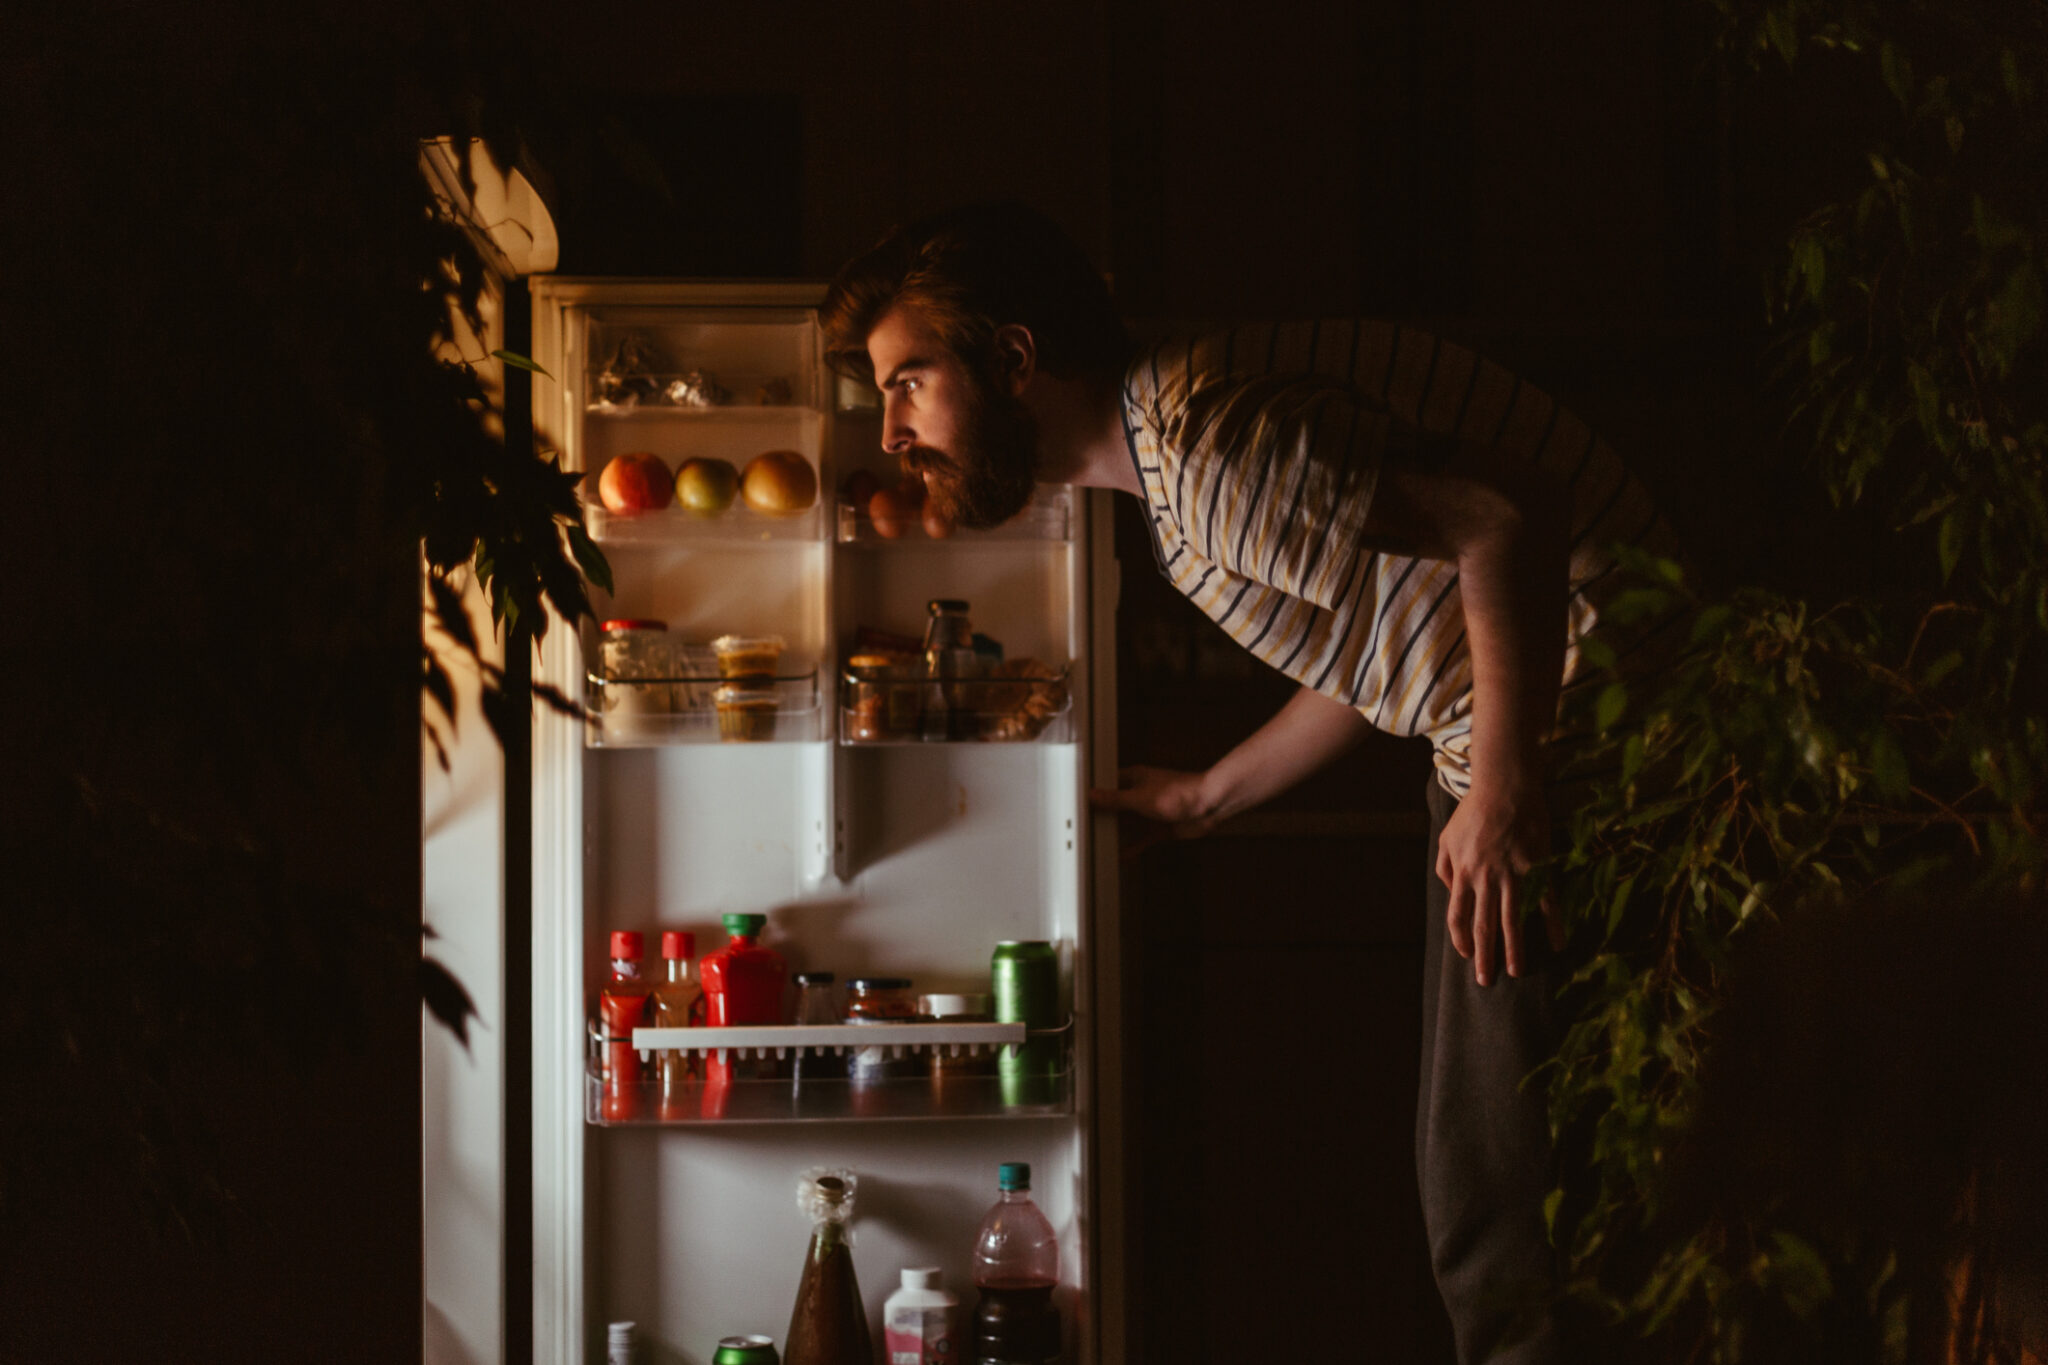 Man looking for snacks in the refrigerator late night